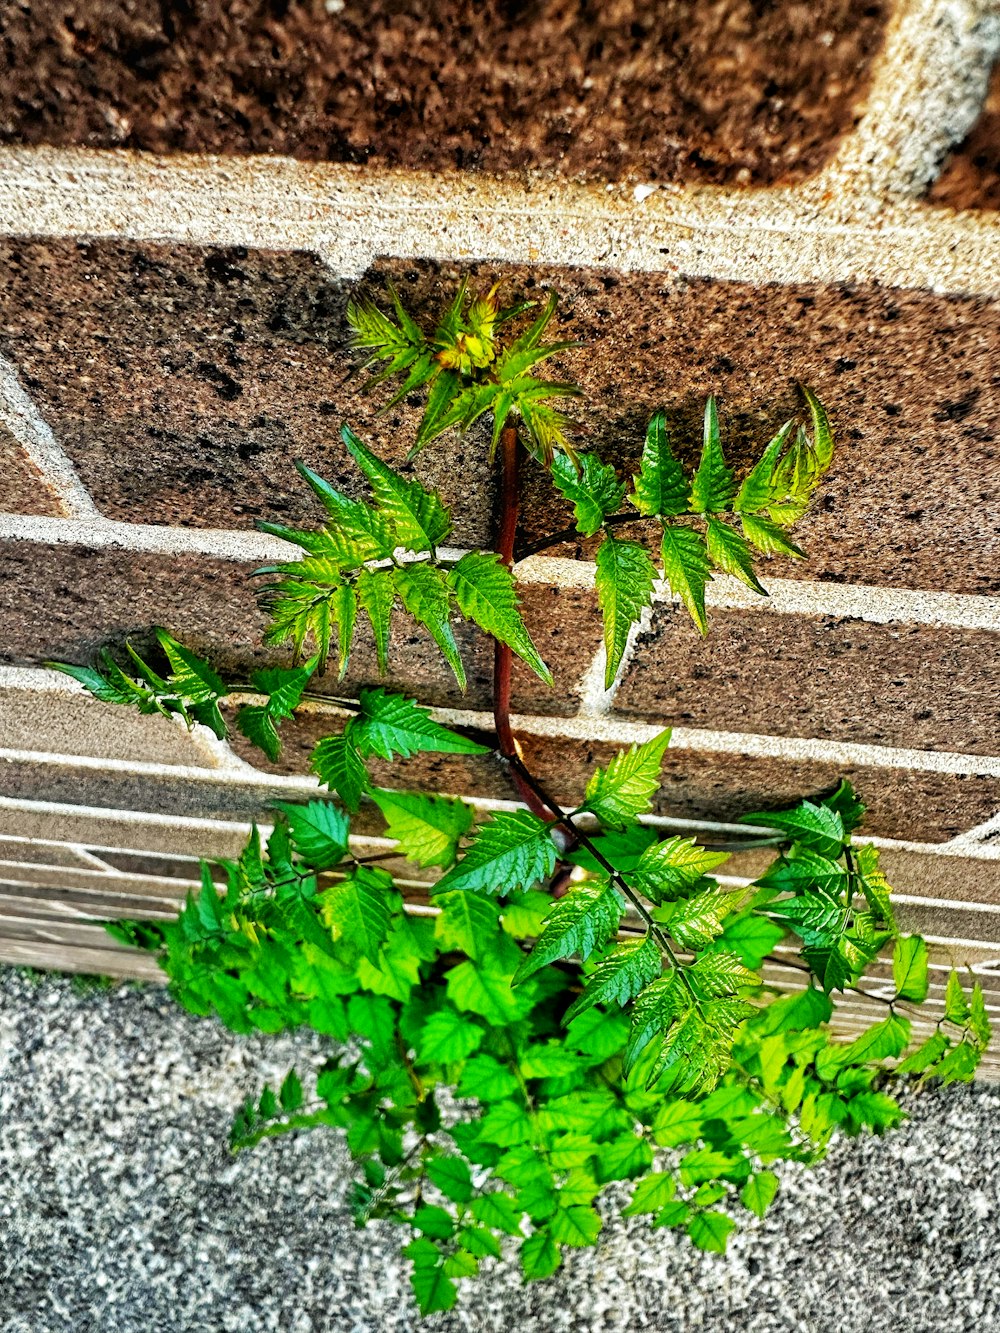 a small green plant growing out of a brick wall